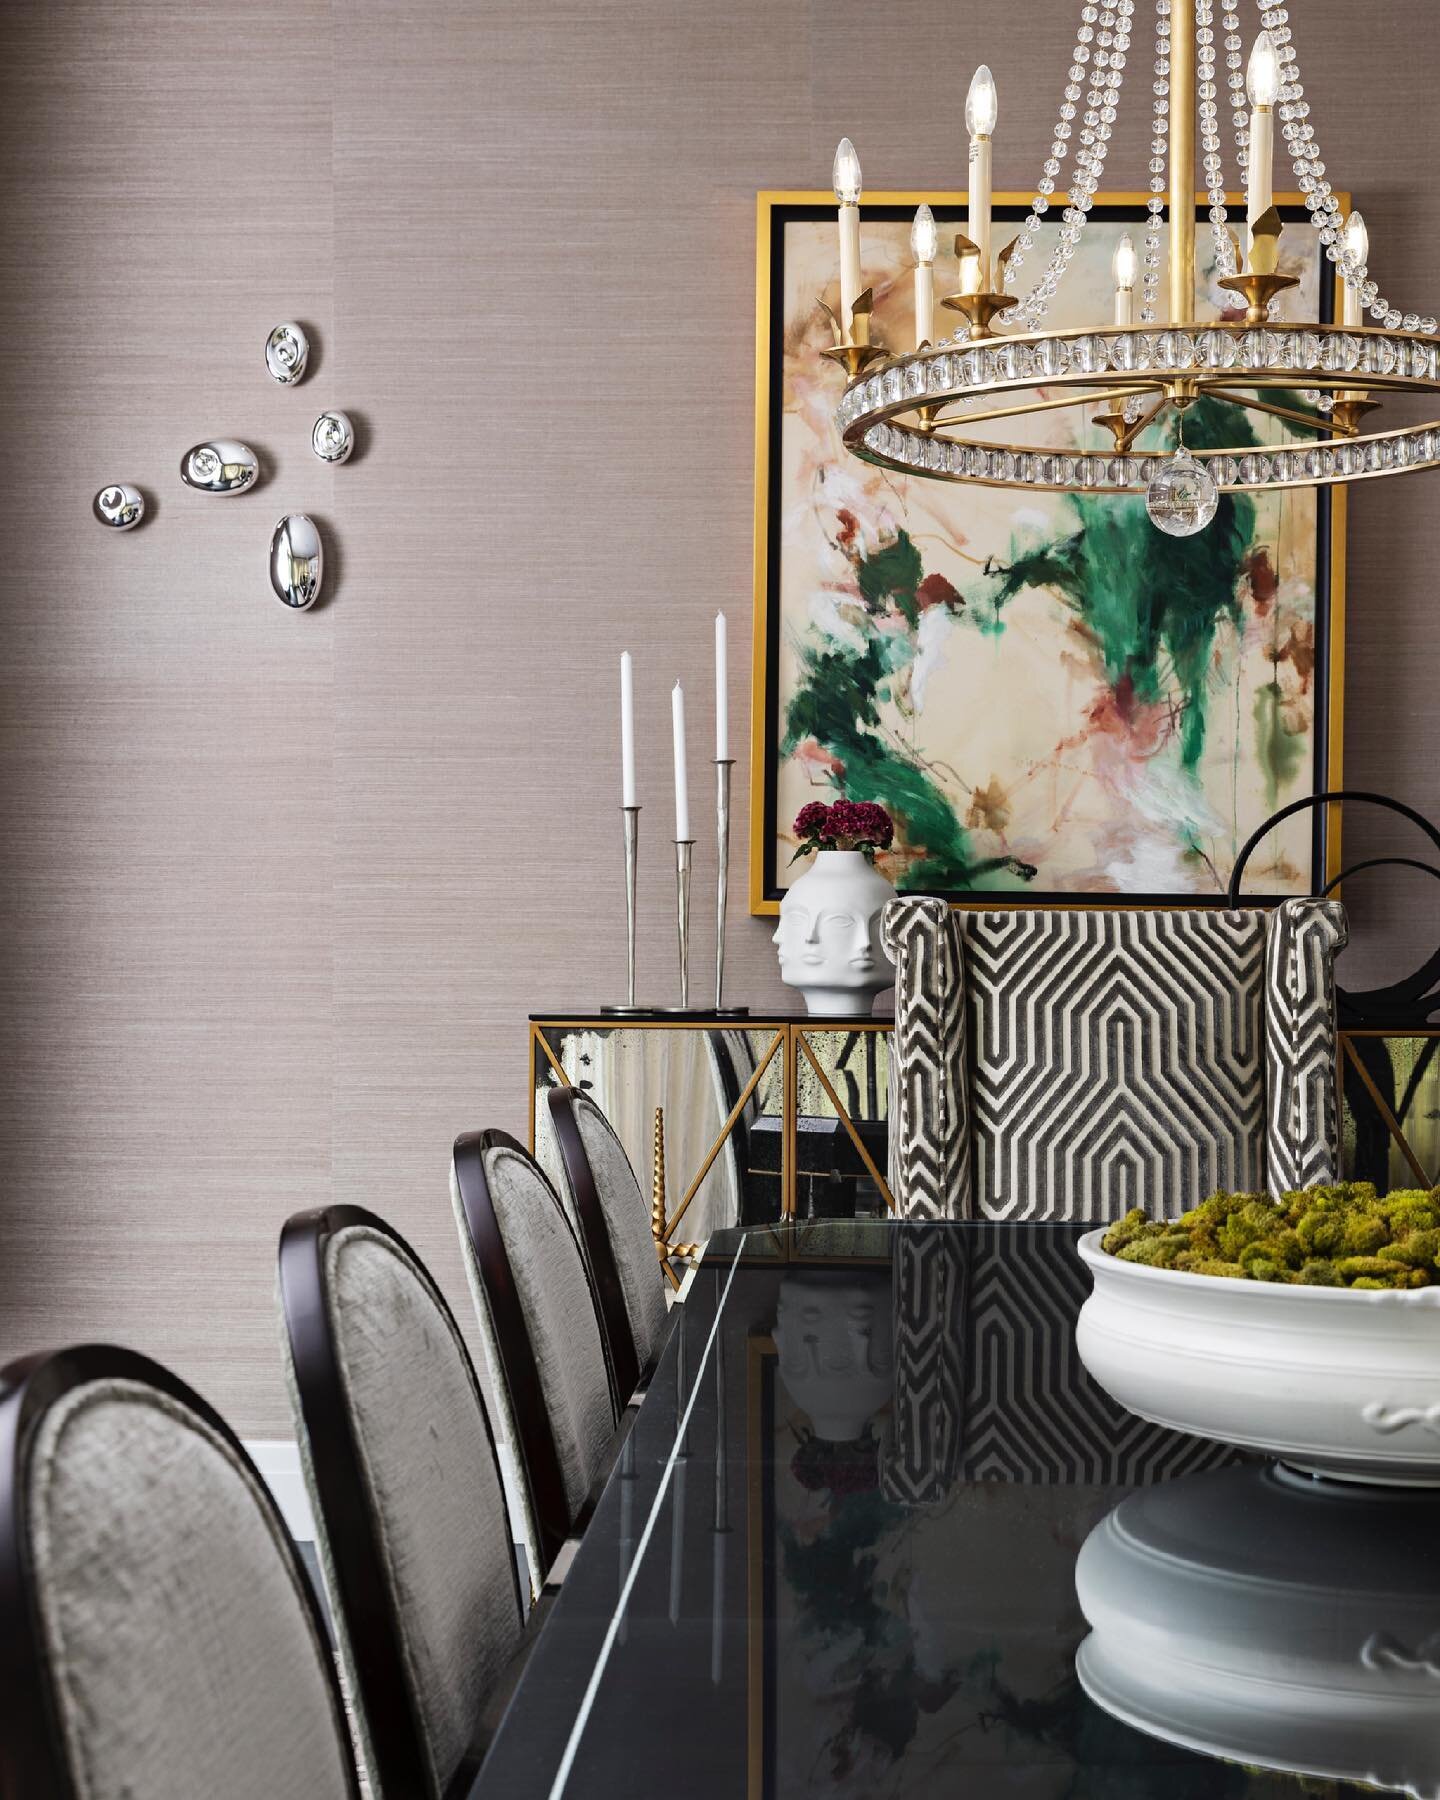 Striking dining room with bold colors, textural grass cloth wallcovering and lustrous velvets. Just a few of our favorite design elements. 
Design: @meriendakadesigngroup 

&bull;
&bull;
&bull;

#interiordesign #interiordesigner #interiors #design #d